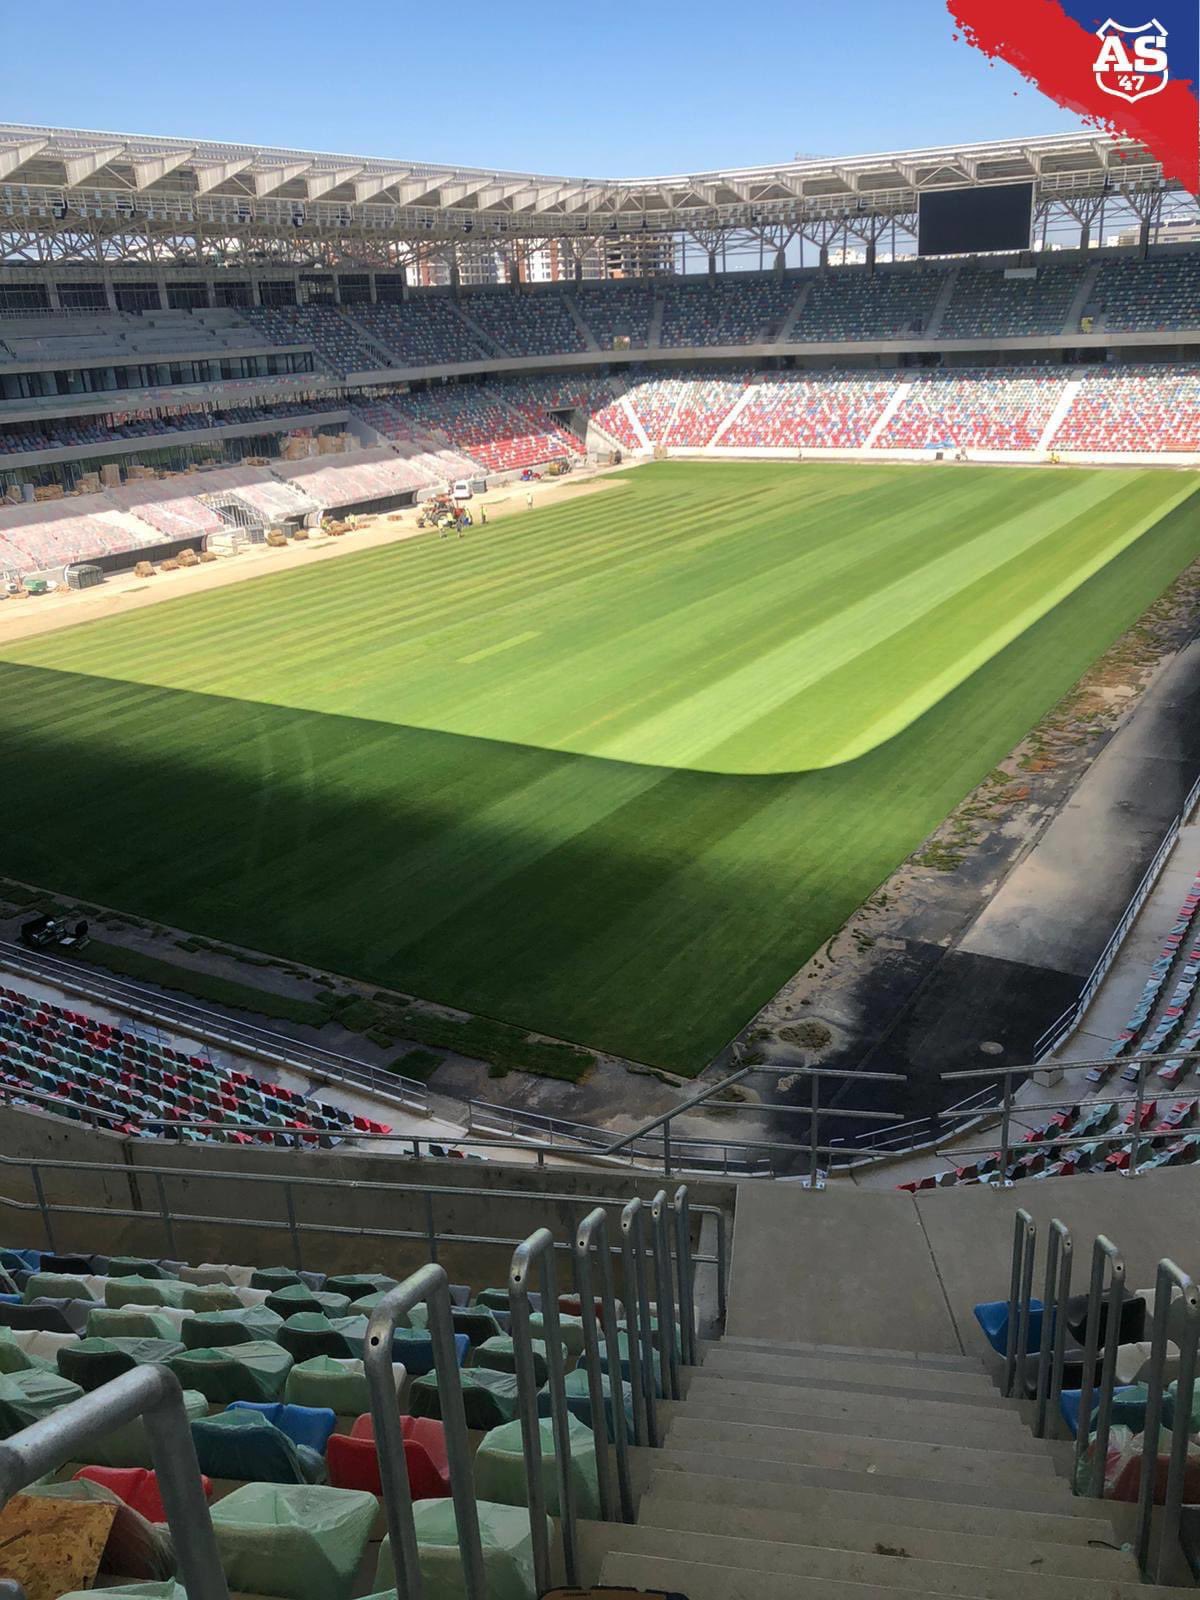 Emanuel Rosu On Twitter Steaua S New 100m Stadium Is Almost Done But Who Will Play On It Https T Co Poq49axtz9